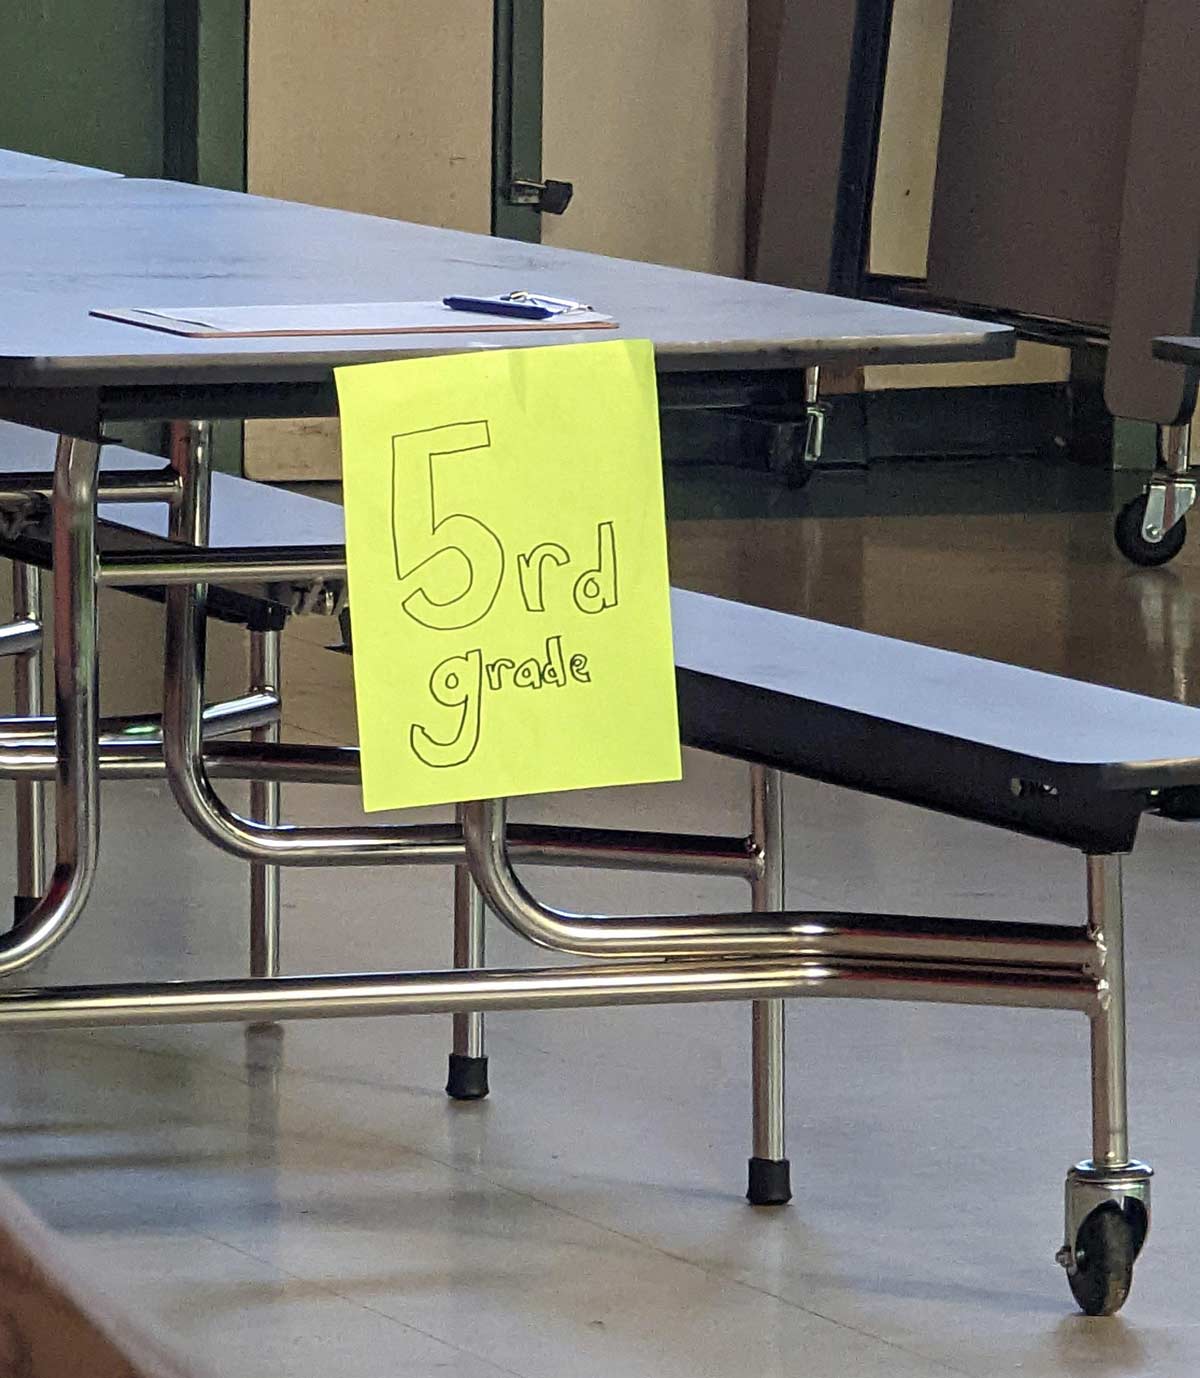 I saw this today at my daughters' elementary school. Maybe someone from the 1rd grade made the sign?